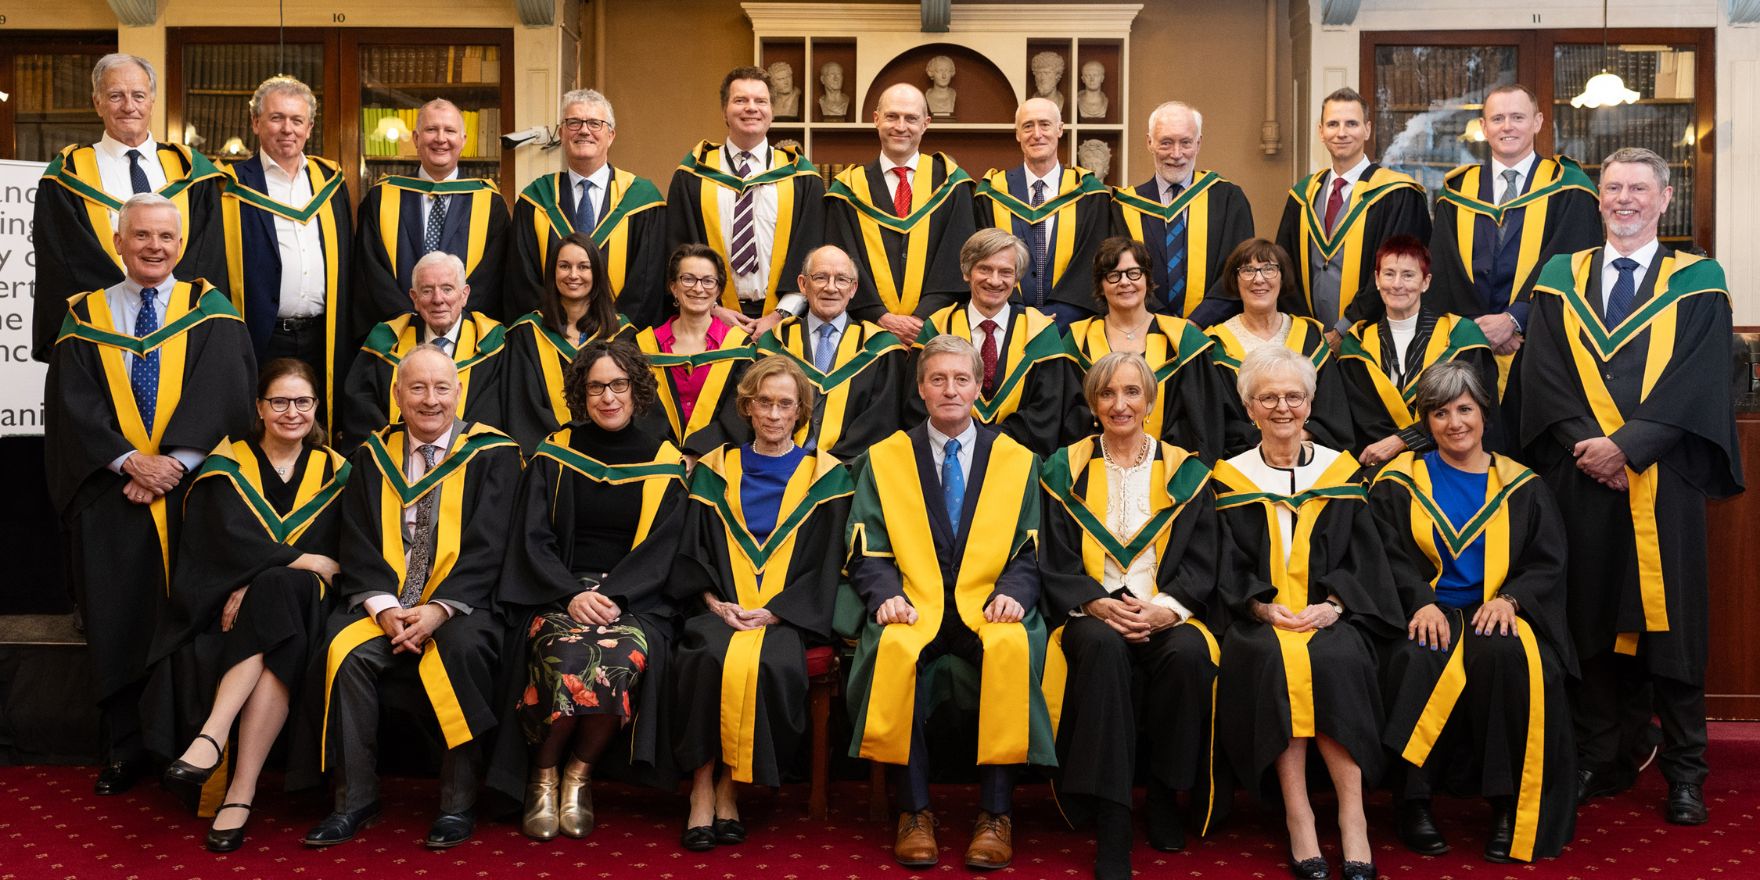 A group of 27 women and men, standing at the back row, with the two rows in front seated, on a stage, all dressed in yellow and green robes, the official robes of the Royal Irish Academy.